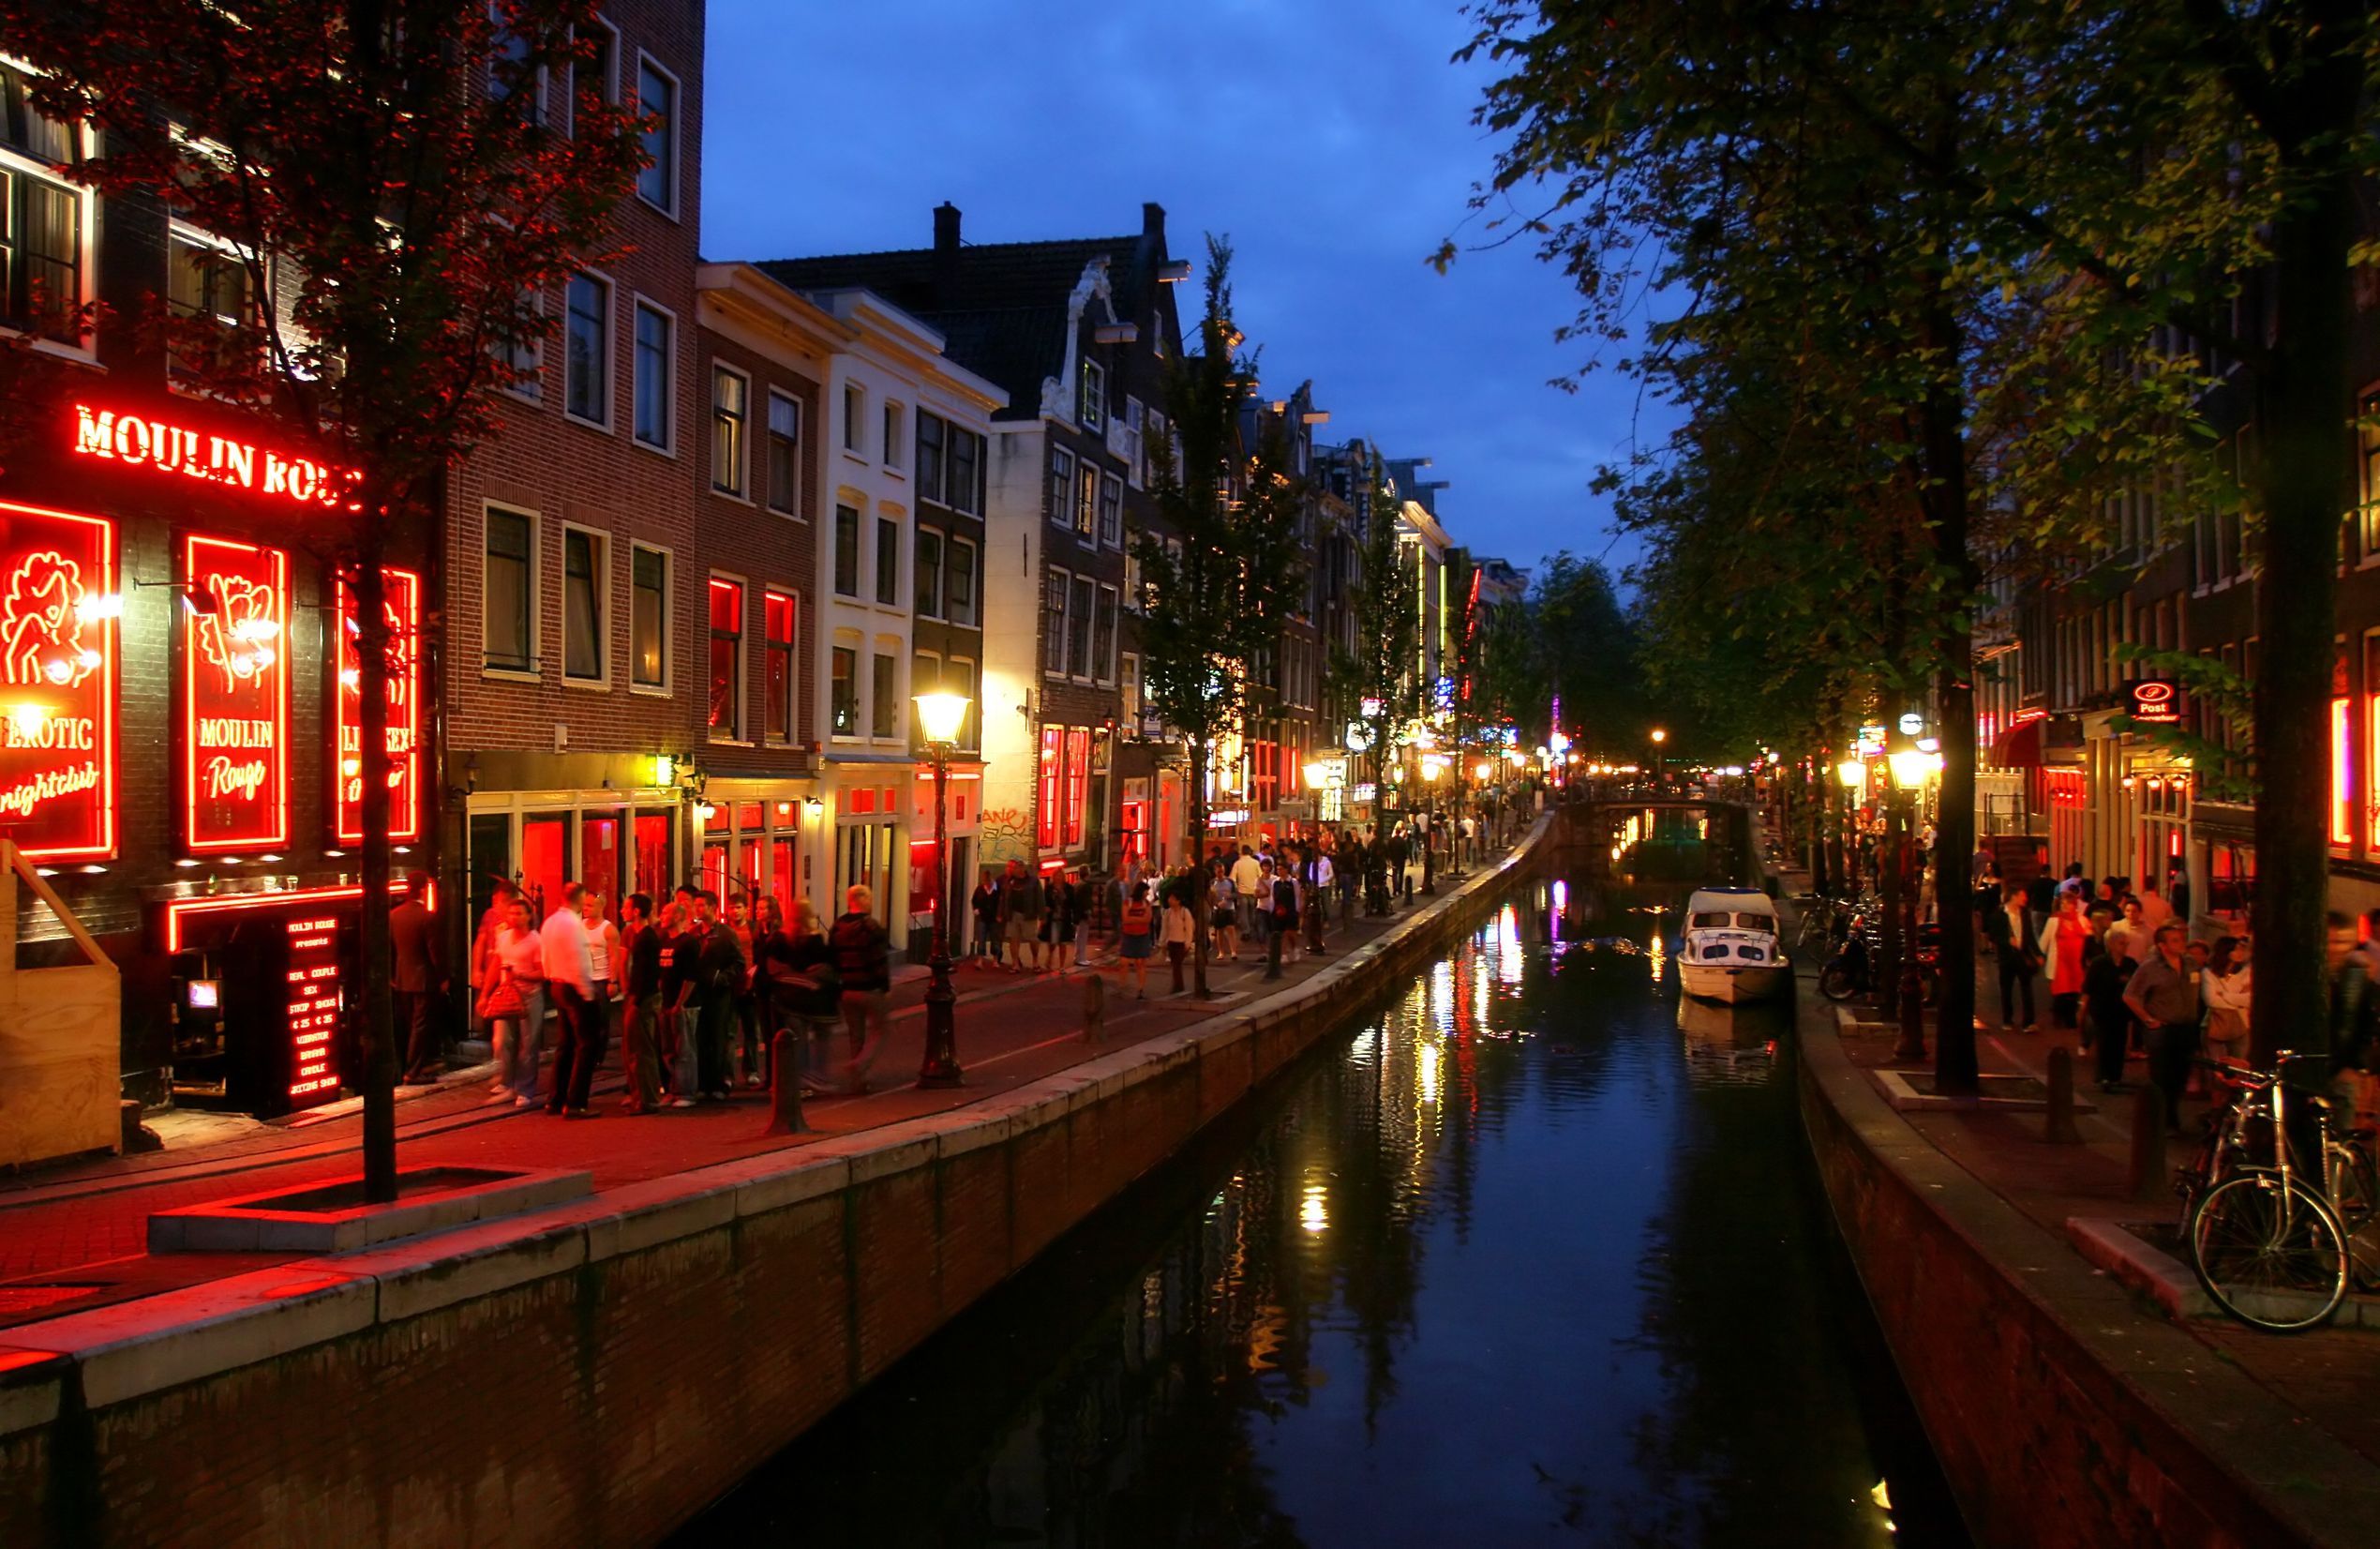 http://www.layoverguide.com/wp-content/uploads/2011/12/Red-Light-District-at-evening-in-Amsterdam-Holland.jpg